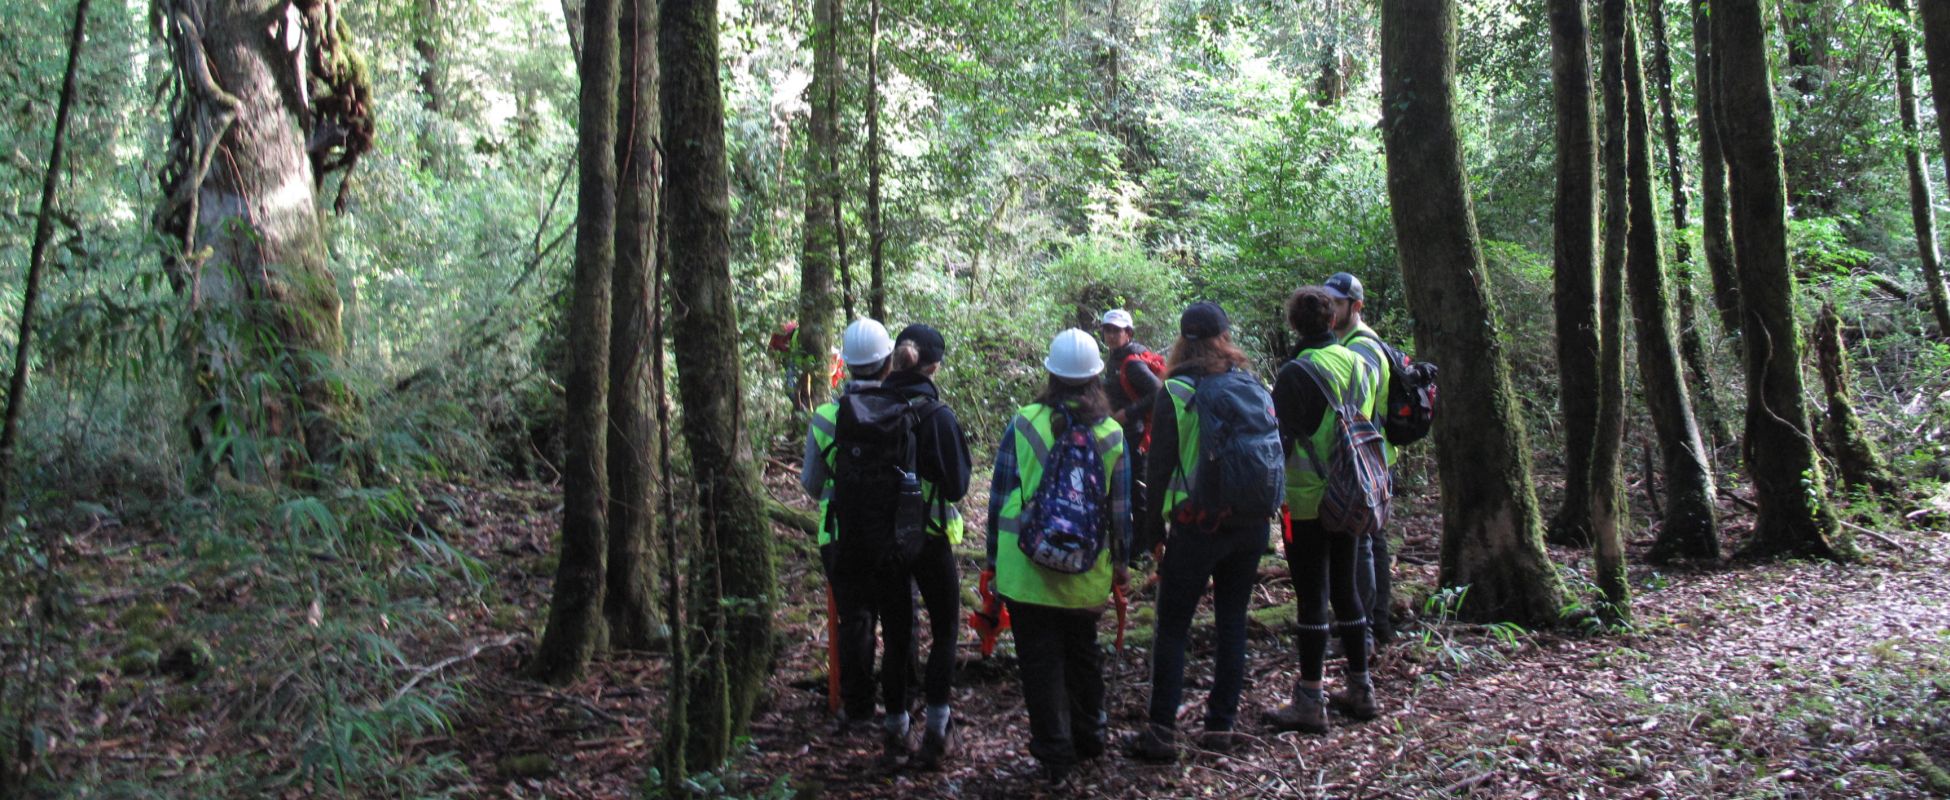 Forestry students standing in a forest